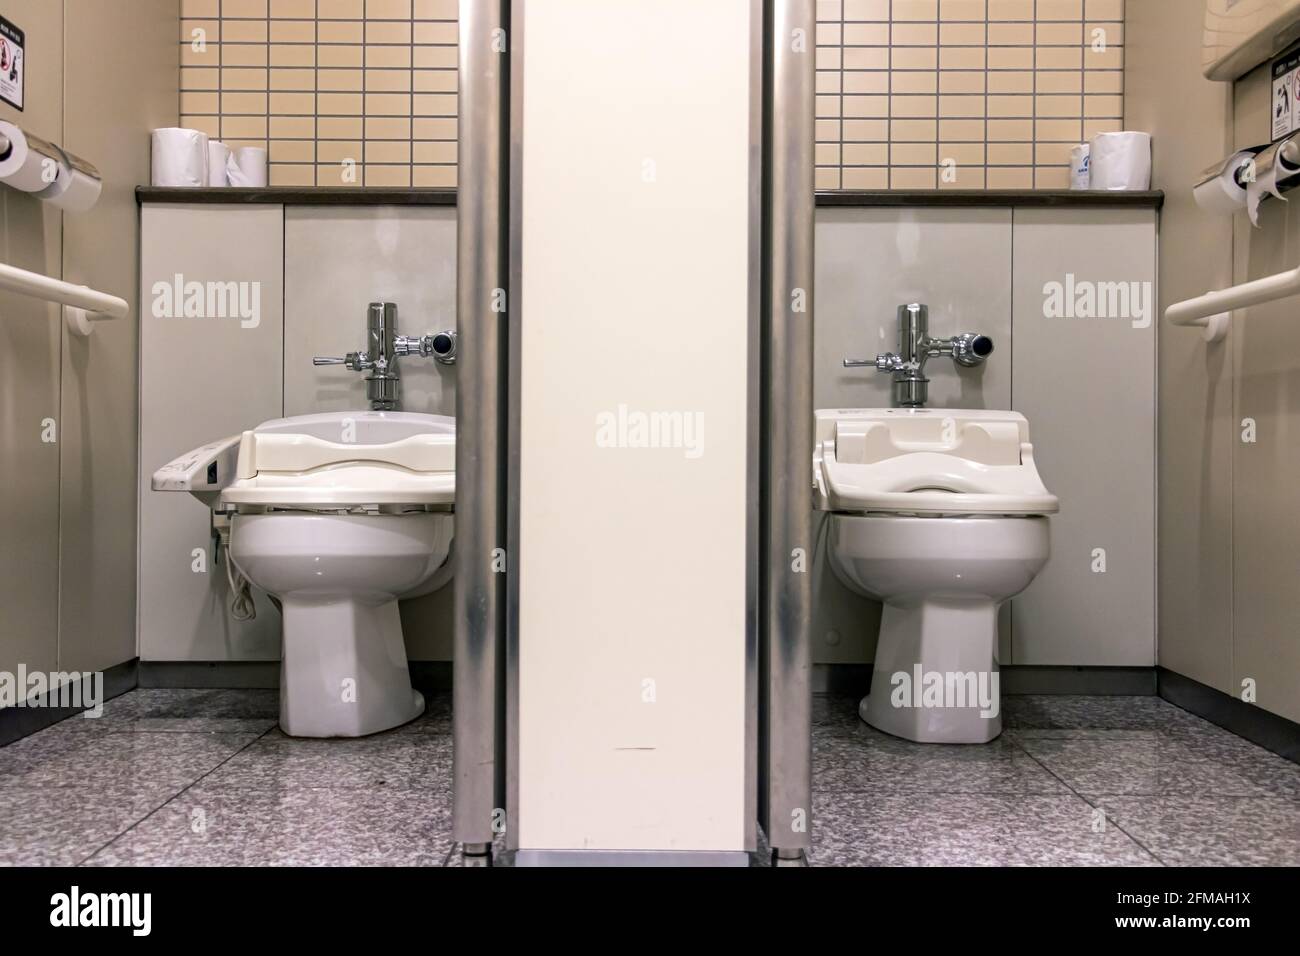 public toilet stock photography and images Alamy